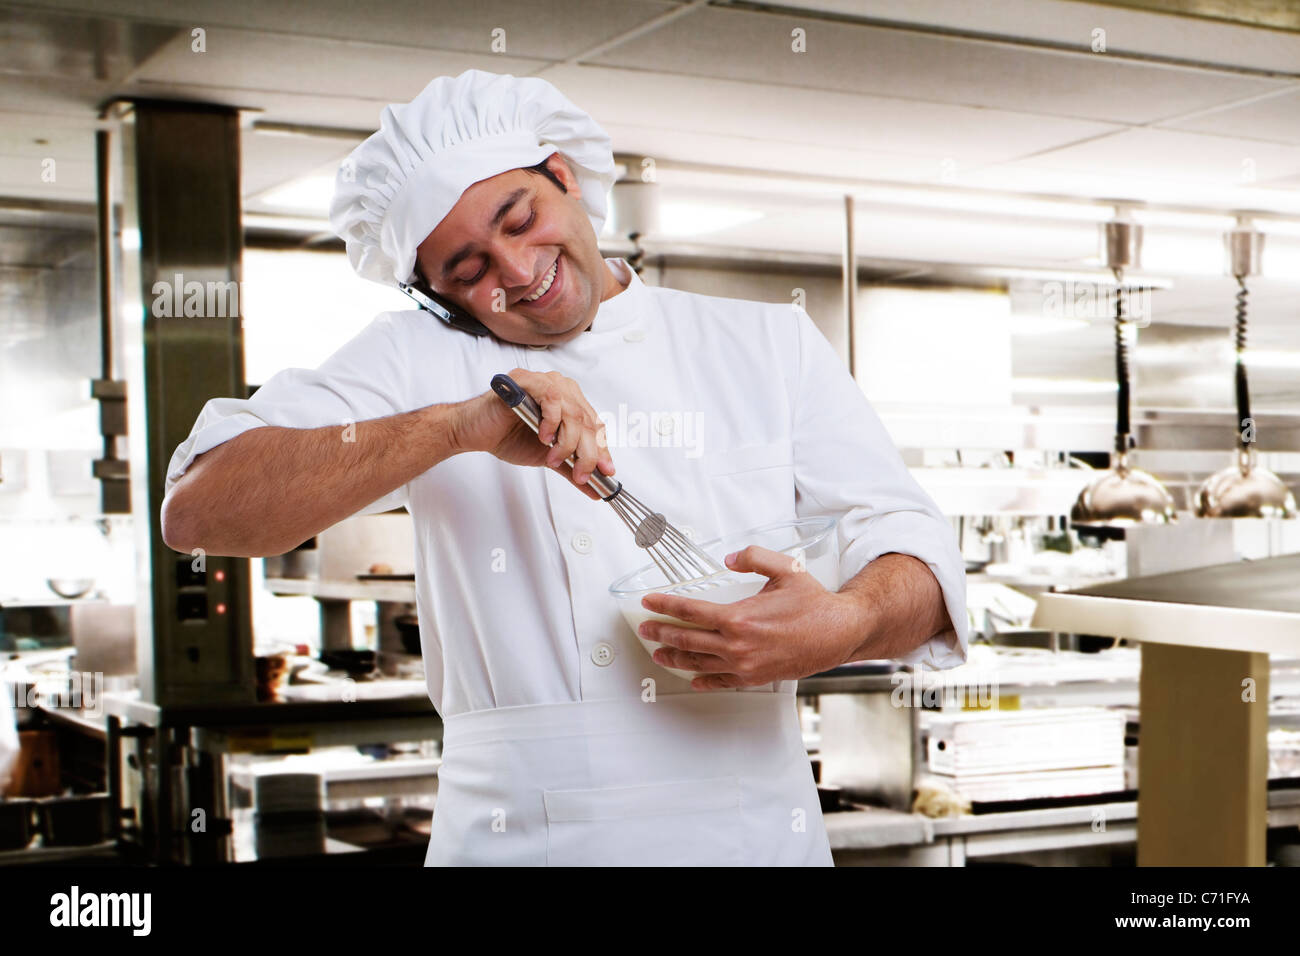 Chef talking on a mobile phone while beating dough Stock Photo